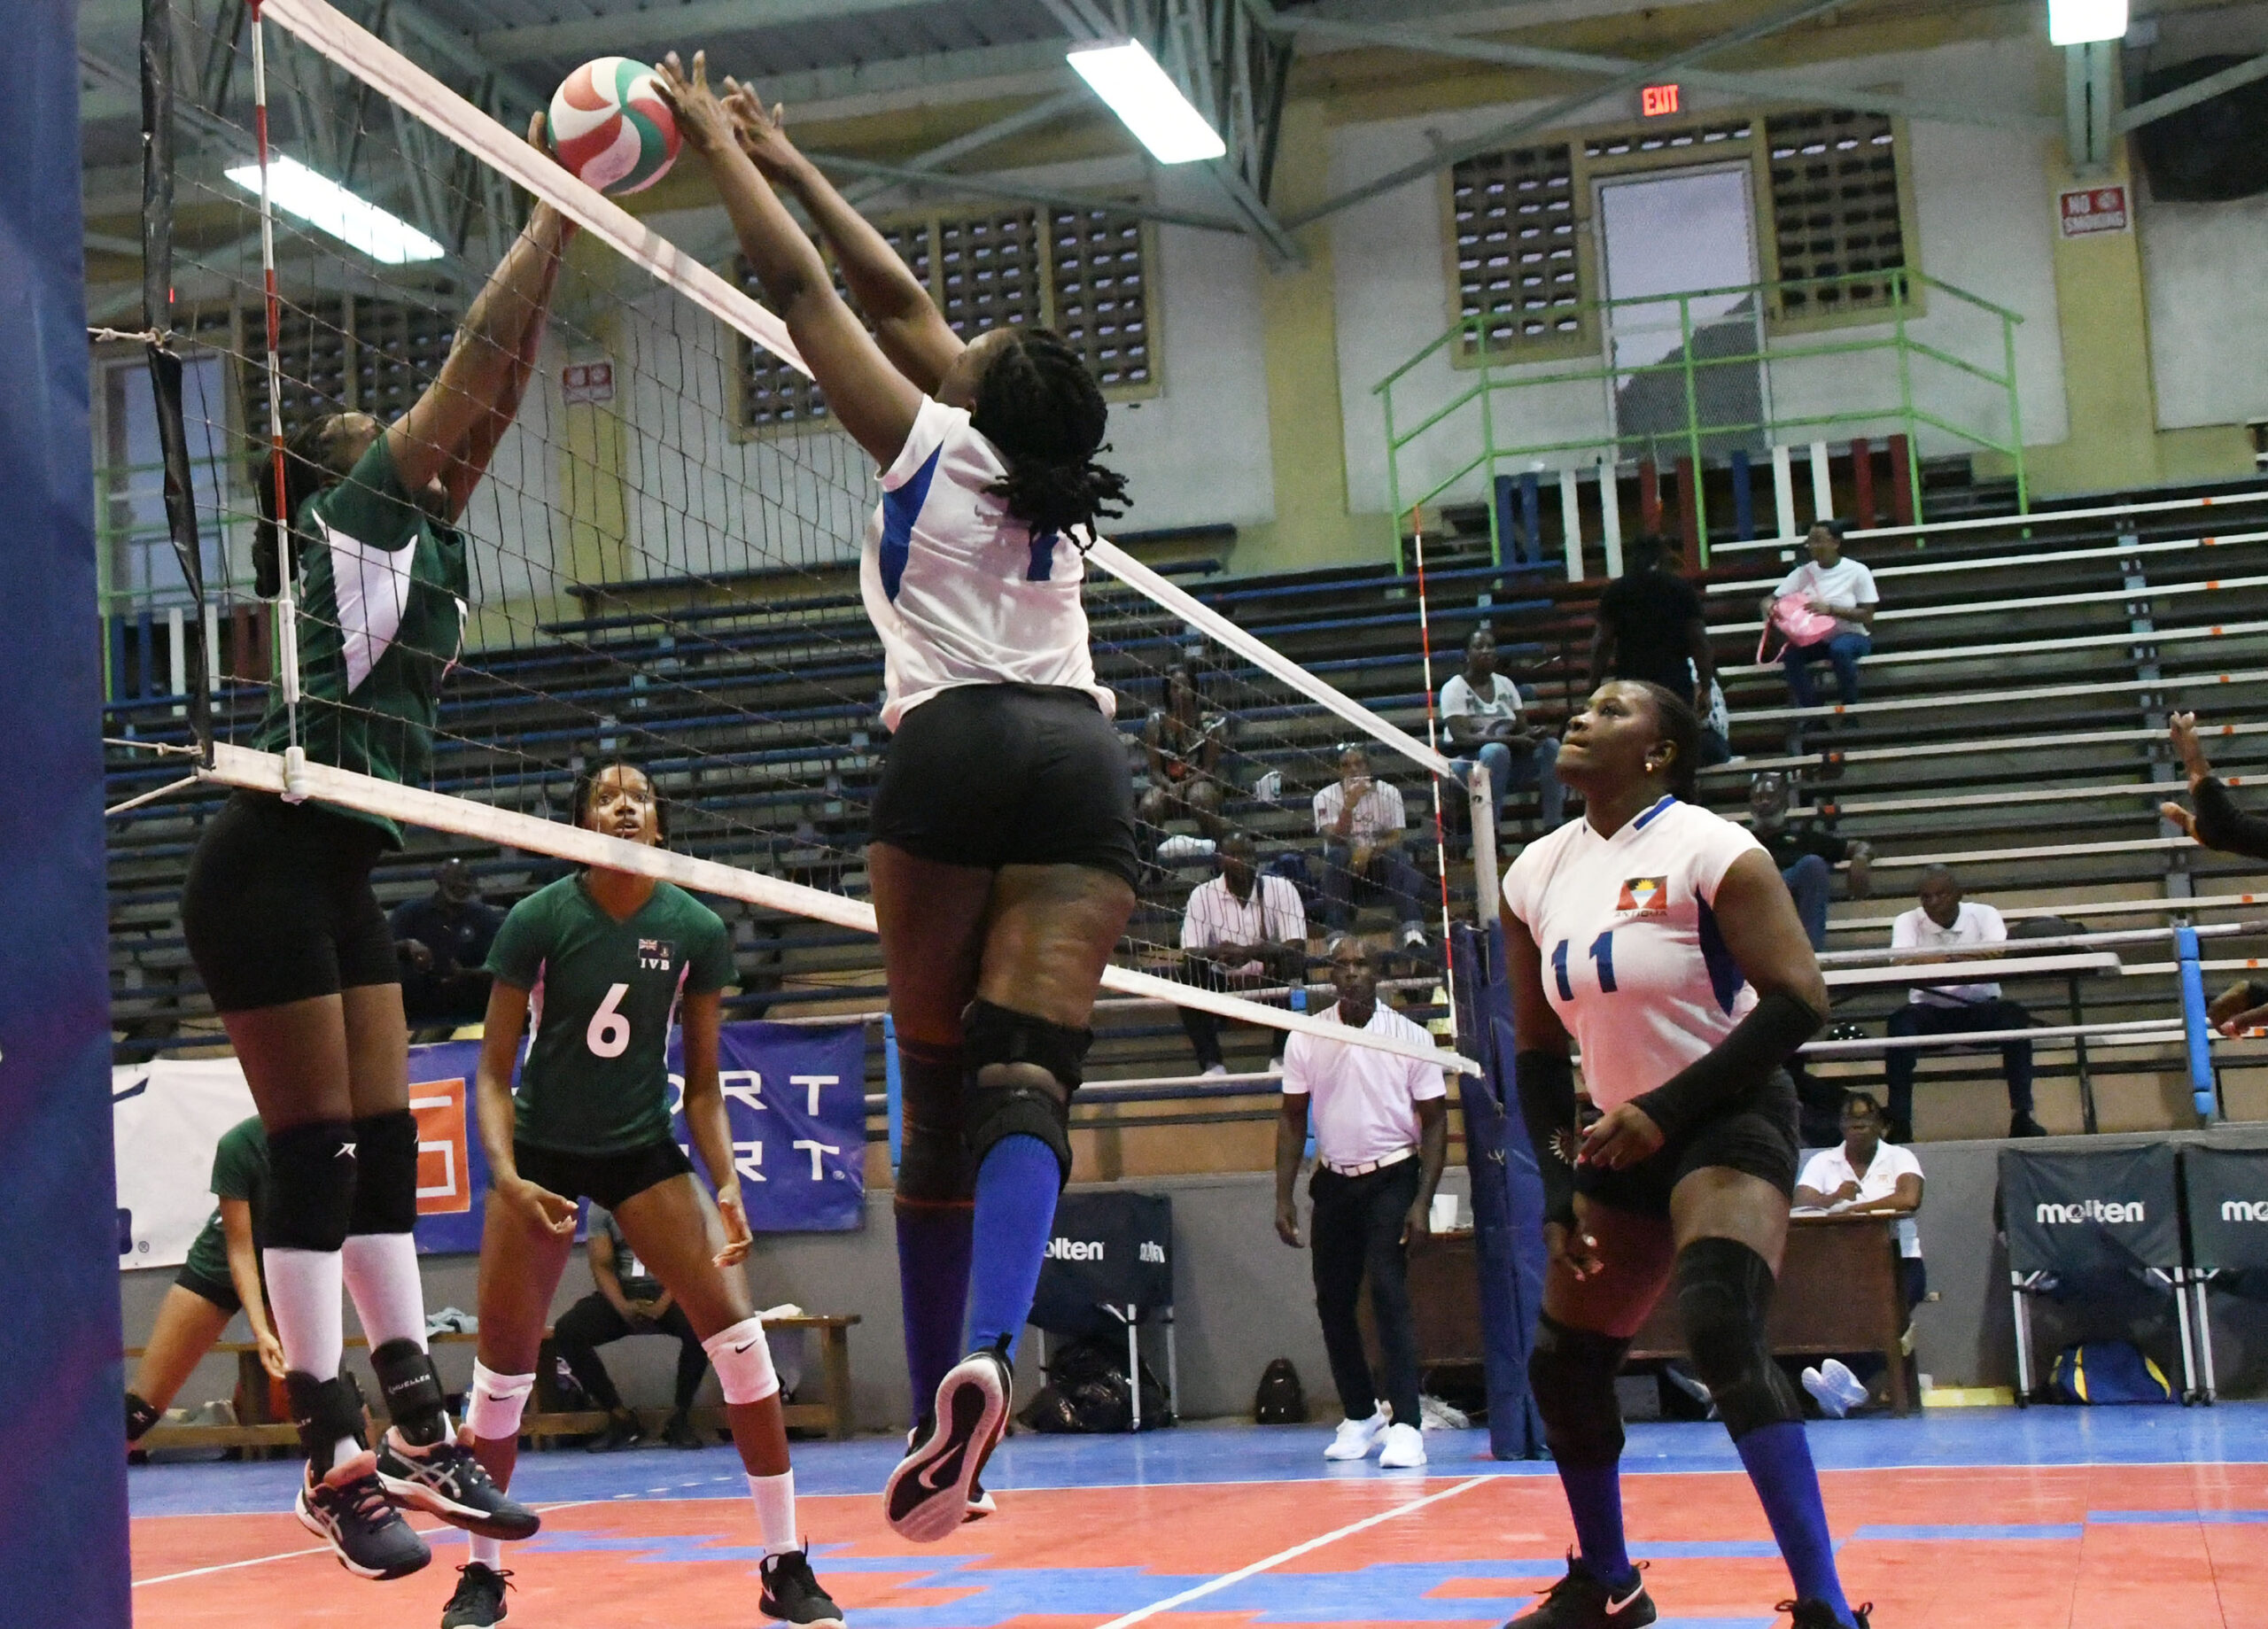 BVI Outlasts Antigua and Barbuda in a 5 set thriller